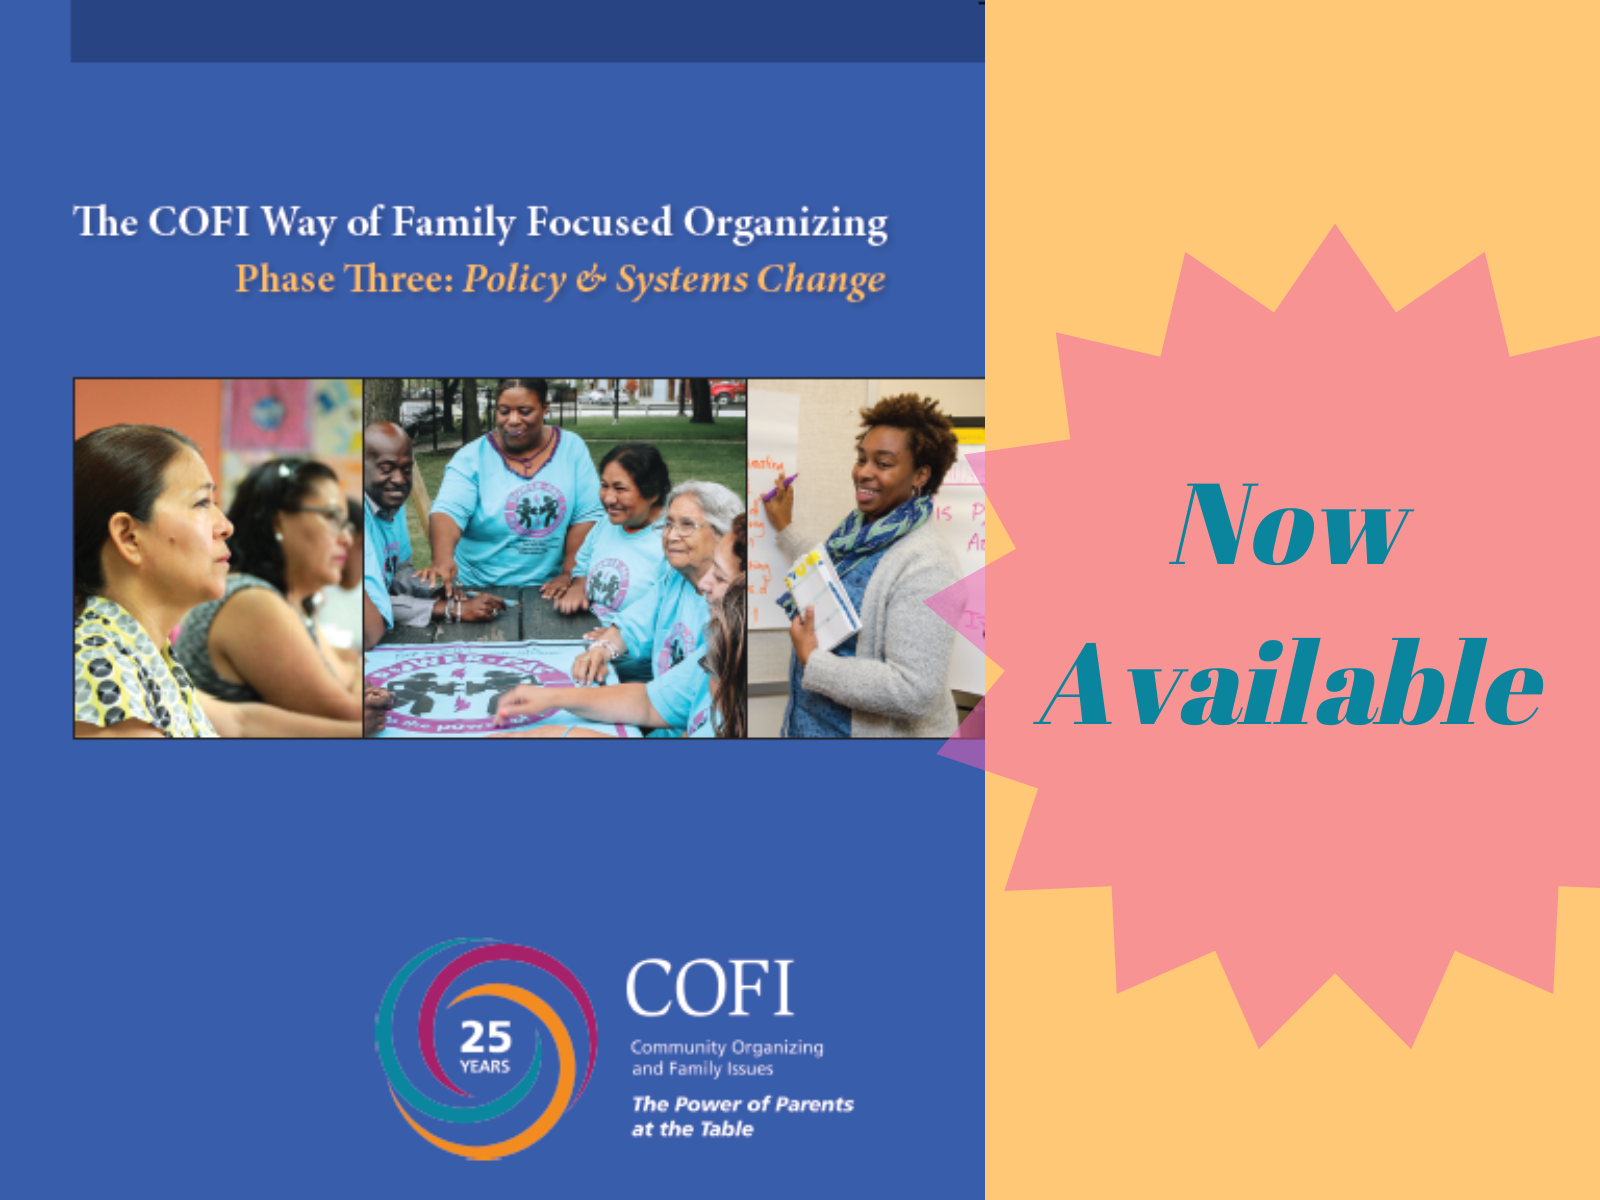 An image of the Phase 3 manual, which features an image of a Latina woman, an image of parents sitting at a picnic table, and a COFI organizer facilitating a training session